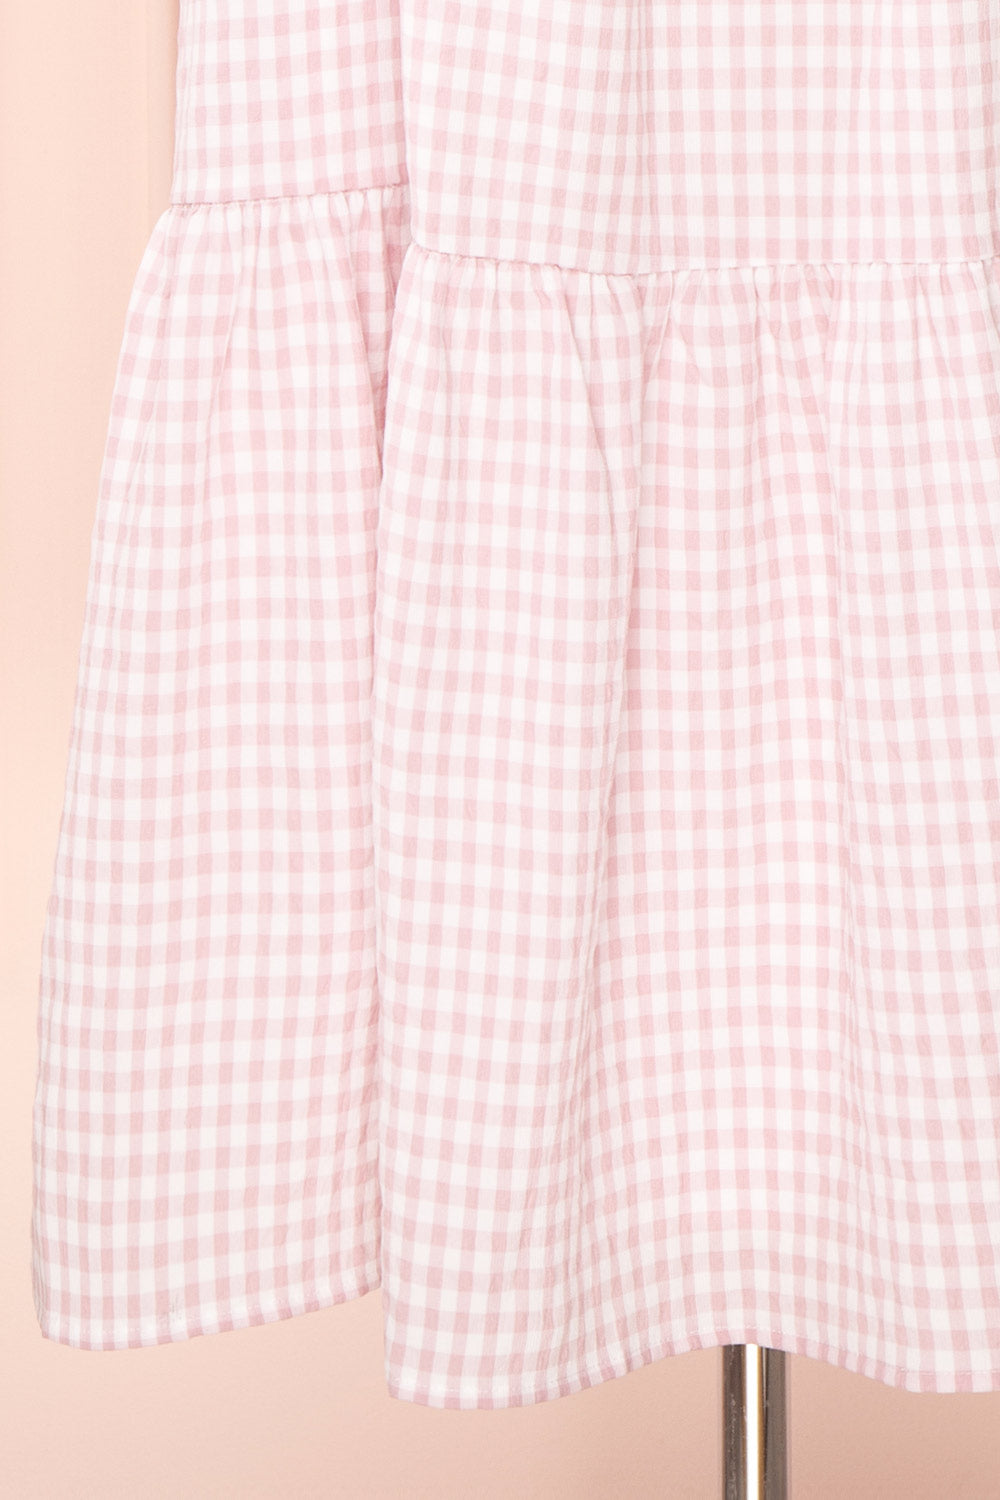 Lieke Square Neck Pink Gingham Midi Dress with Ruffles | Boutique 1861 bottom 